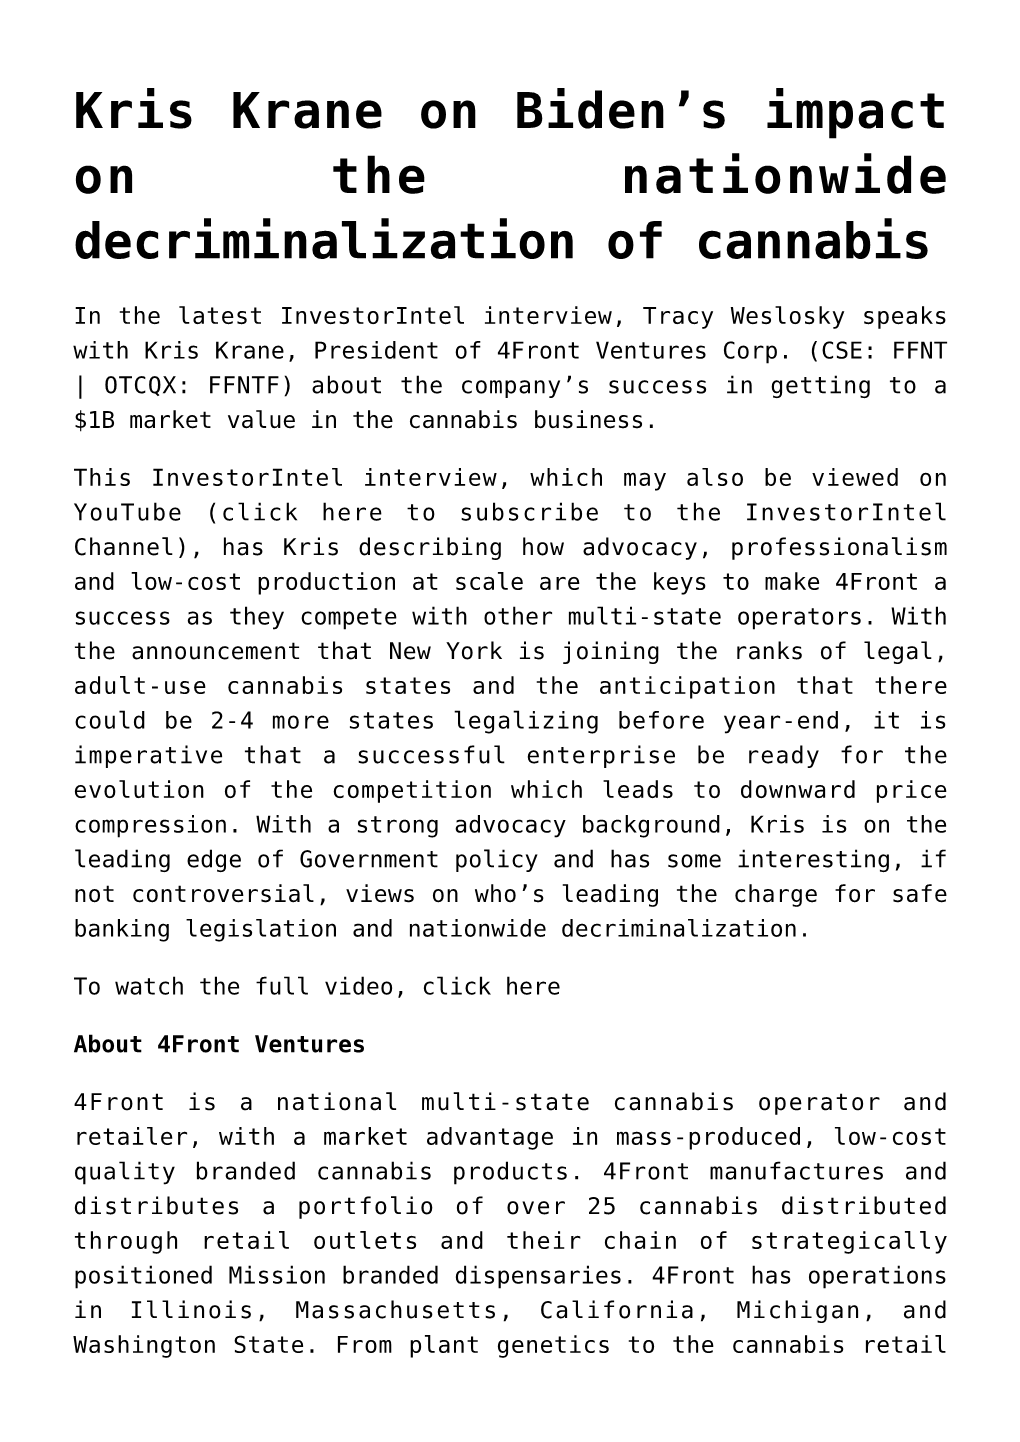 S Impact on the Nationwide Decriminalization of Cannabis